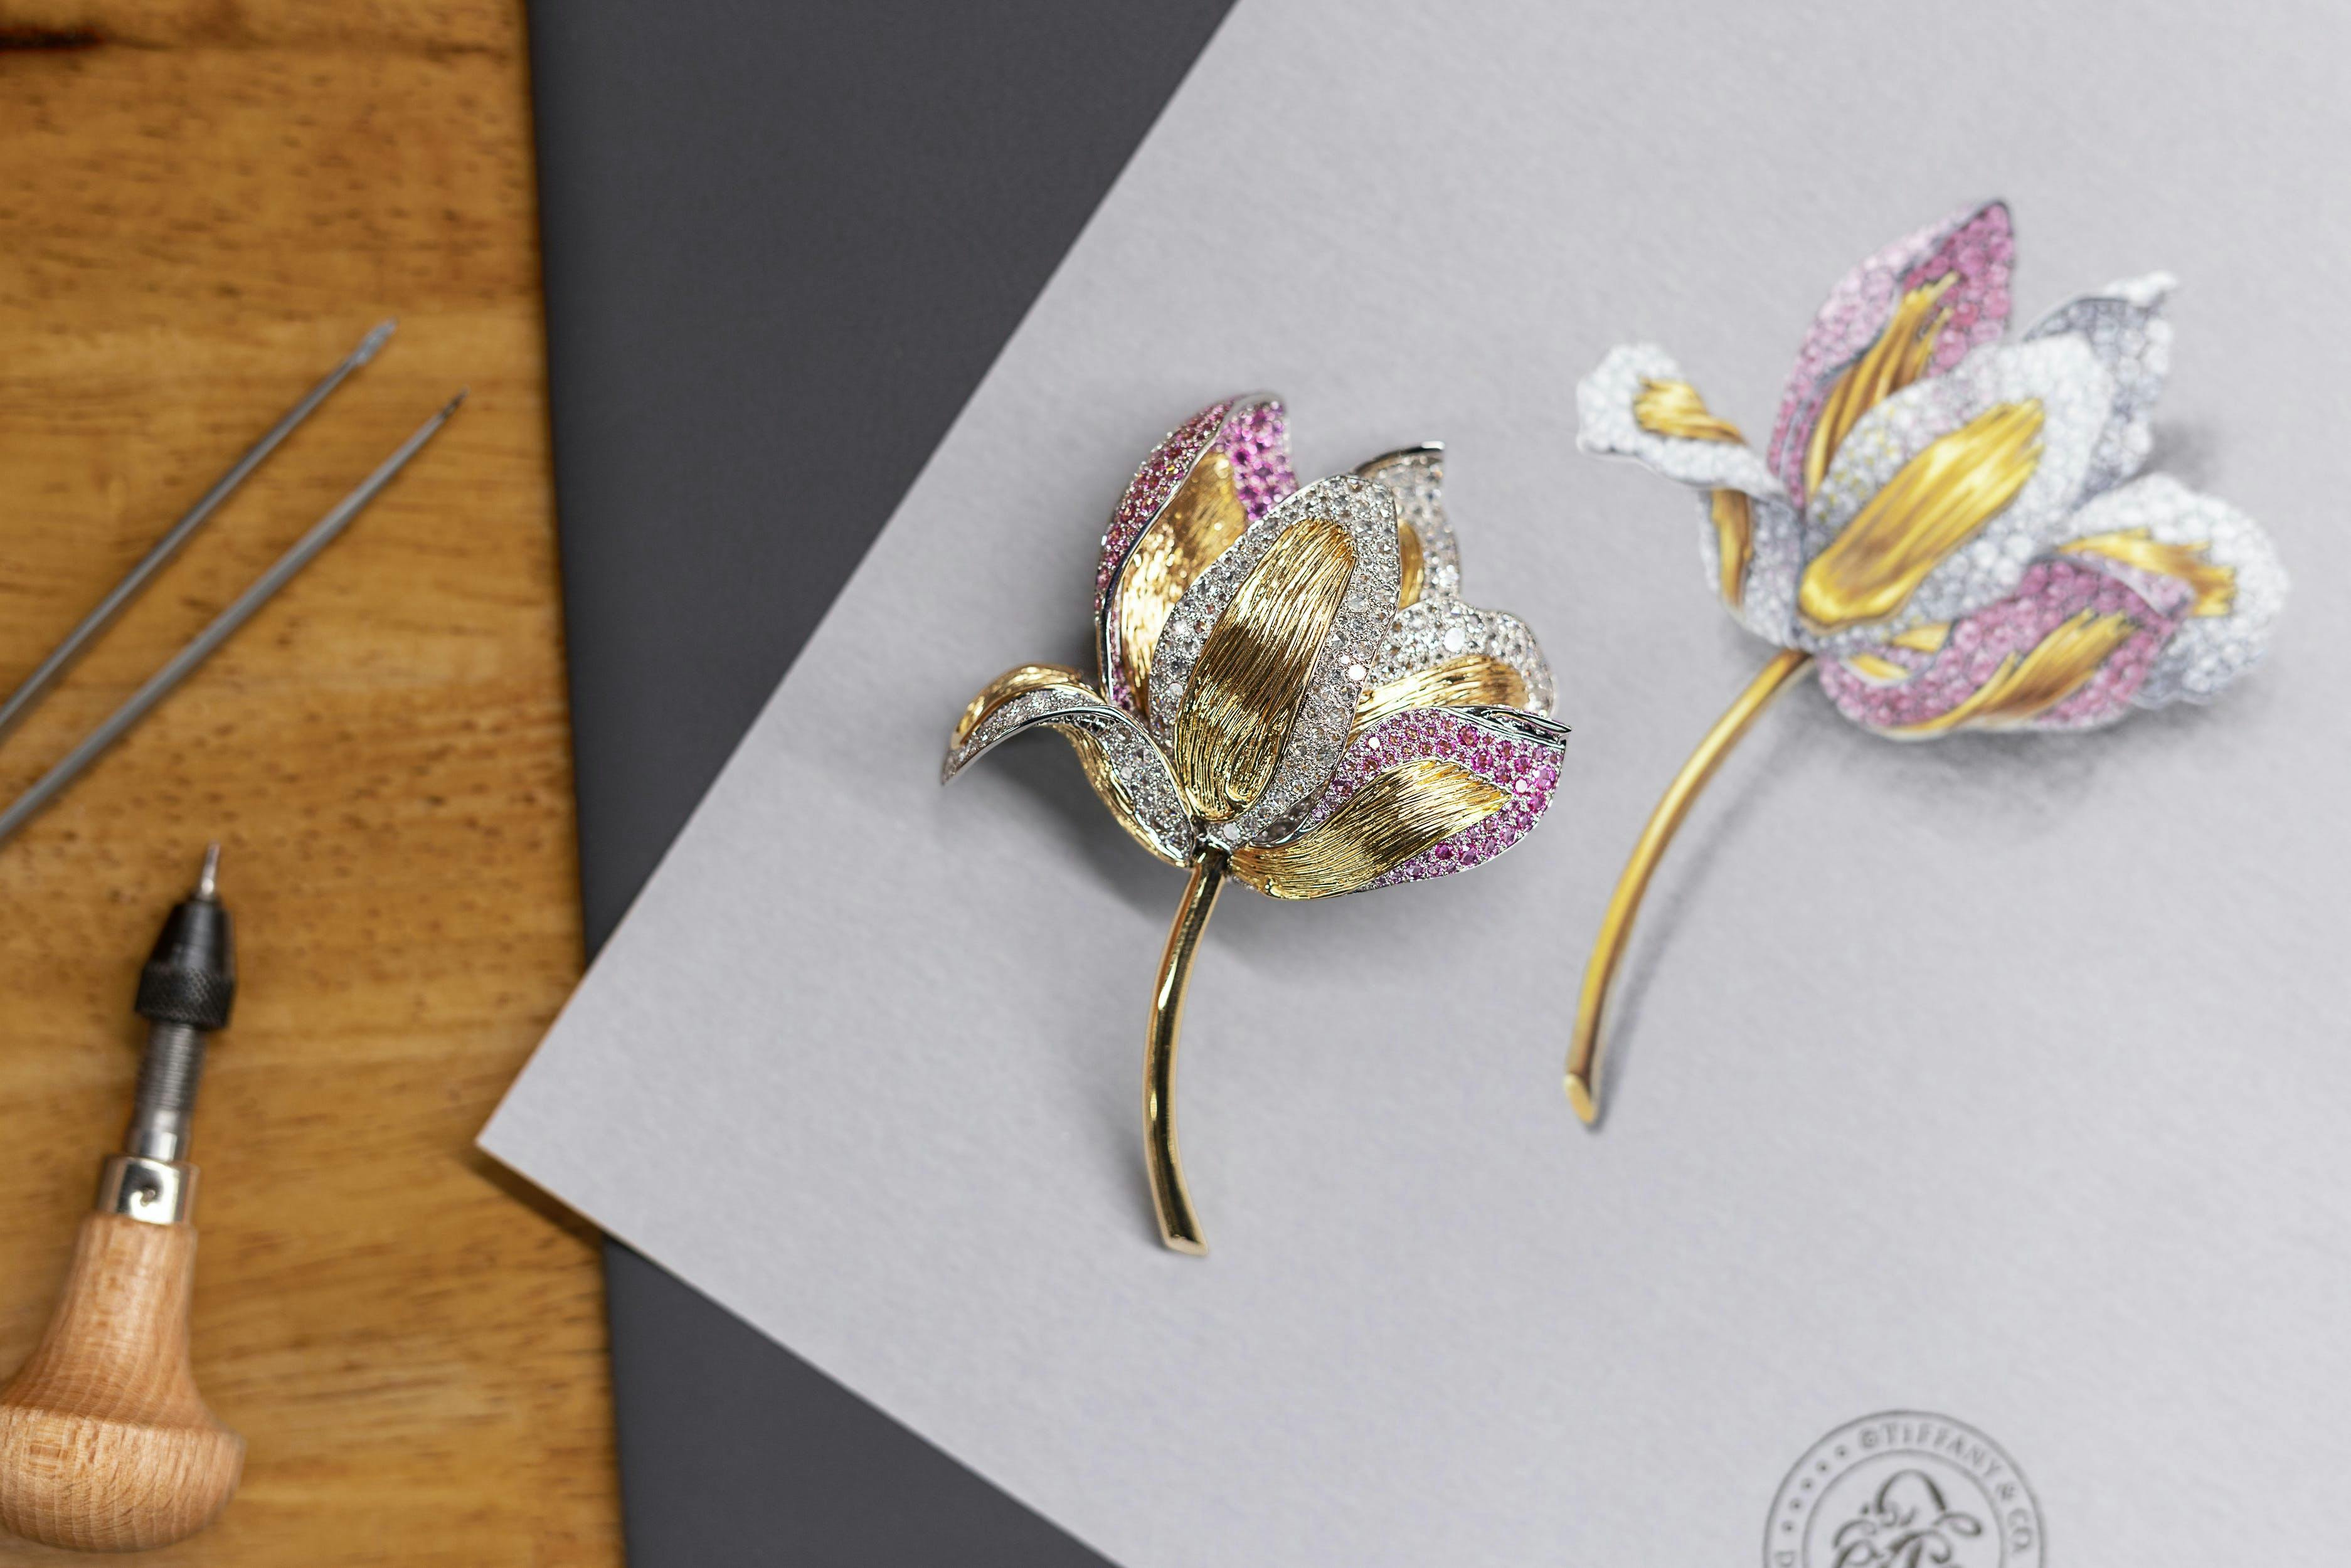 Tiffany & Co. Botanica Blue Book 2022 high jewellery collection brooch in platinum and 18k yellow gold with pink sapphires and diamonds